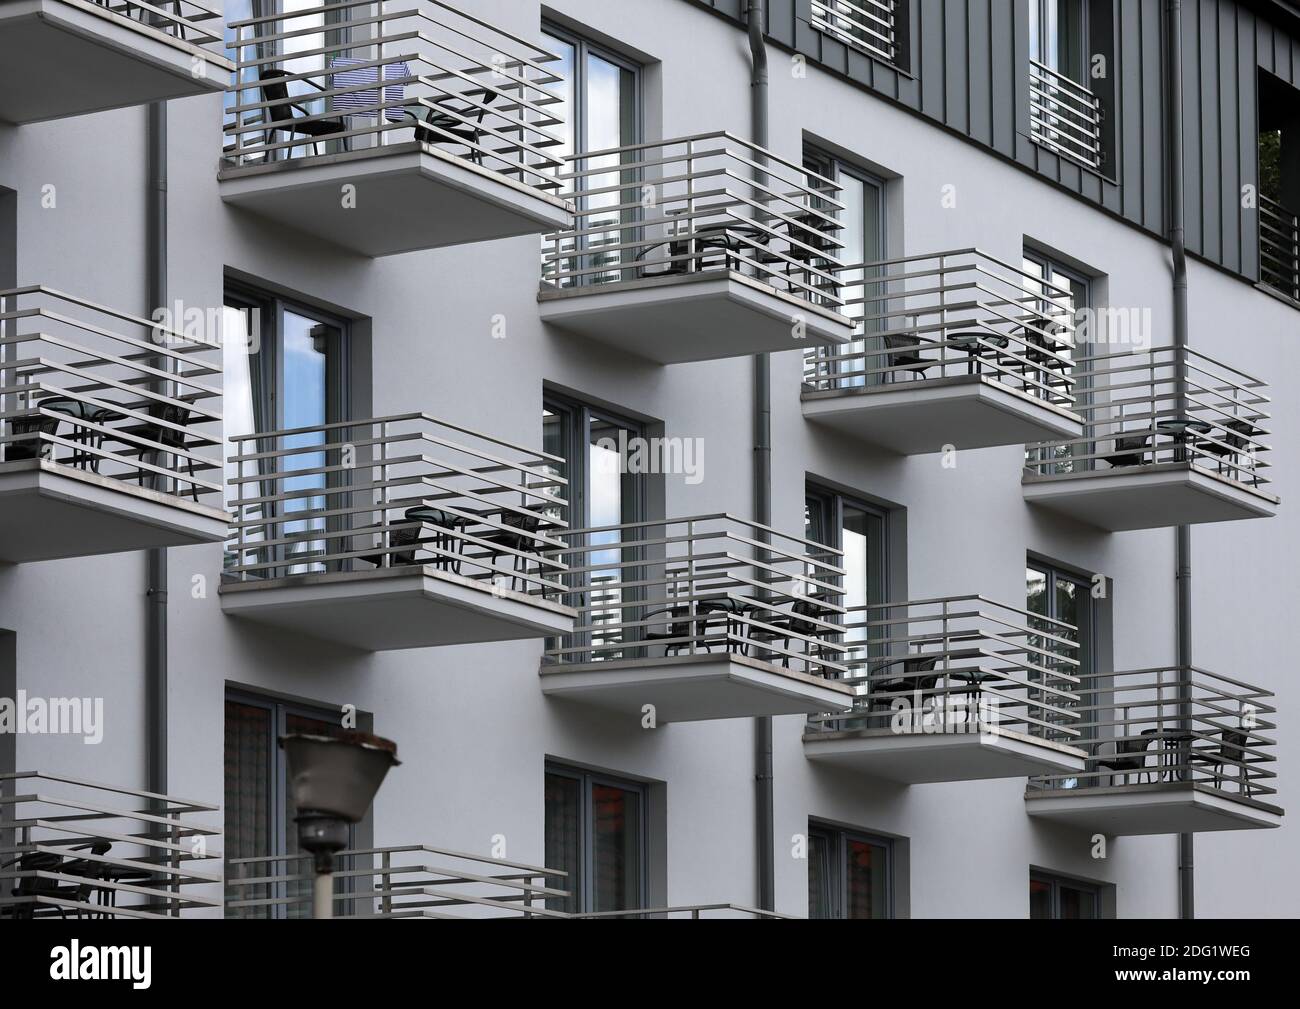 Balconies in the city in an apartment building Stock Photo